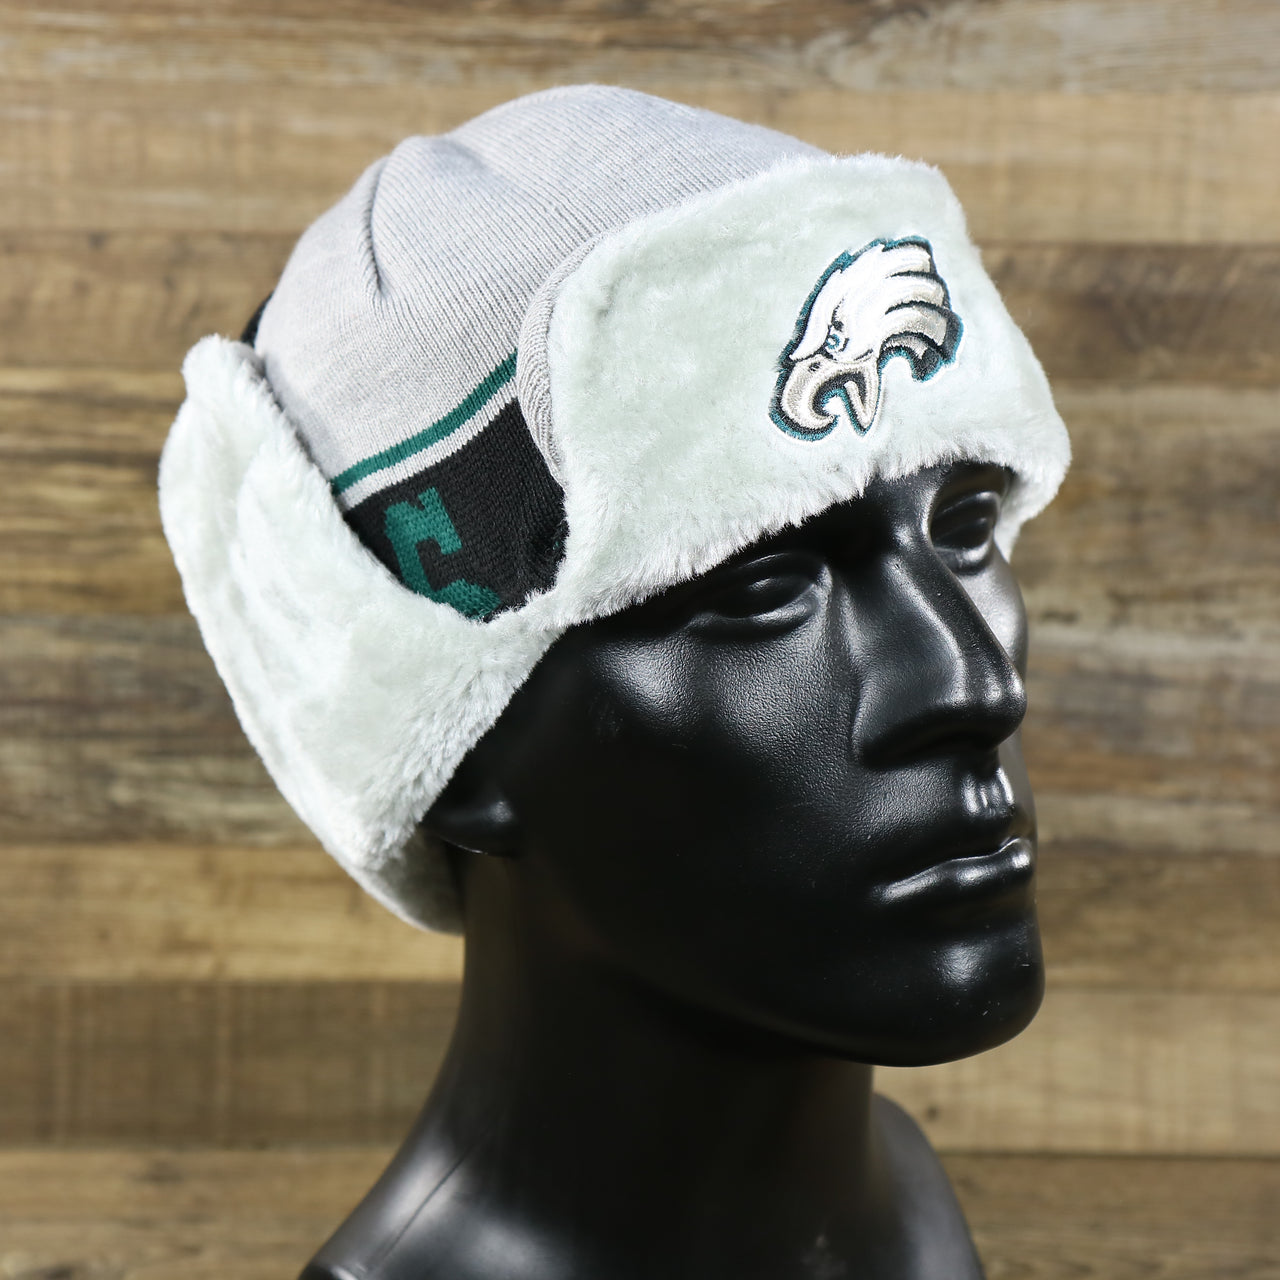 The Philadelphia Eagles Logo Wrapped Around Wordmark Trapper Hat | Gray Ushanka Hat with sides pinned up